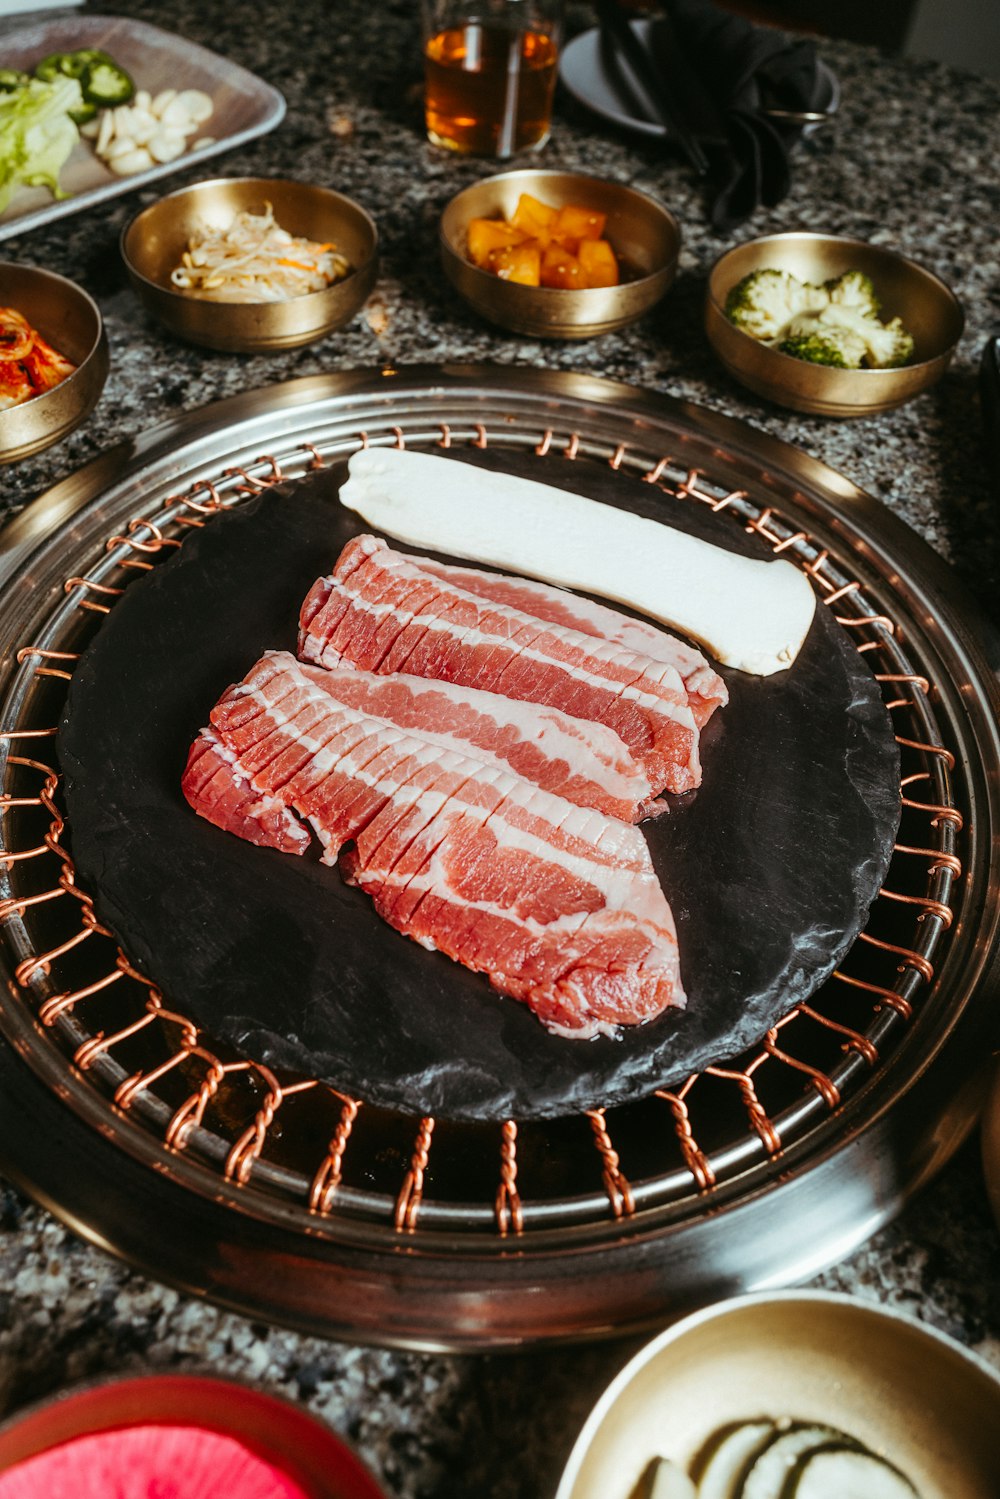 raw meat is cooking on a grill in a kitchen